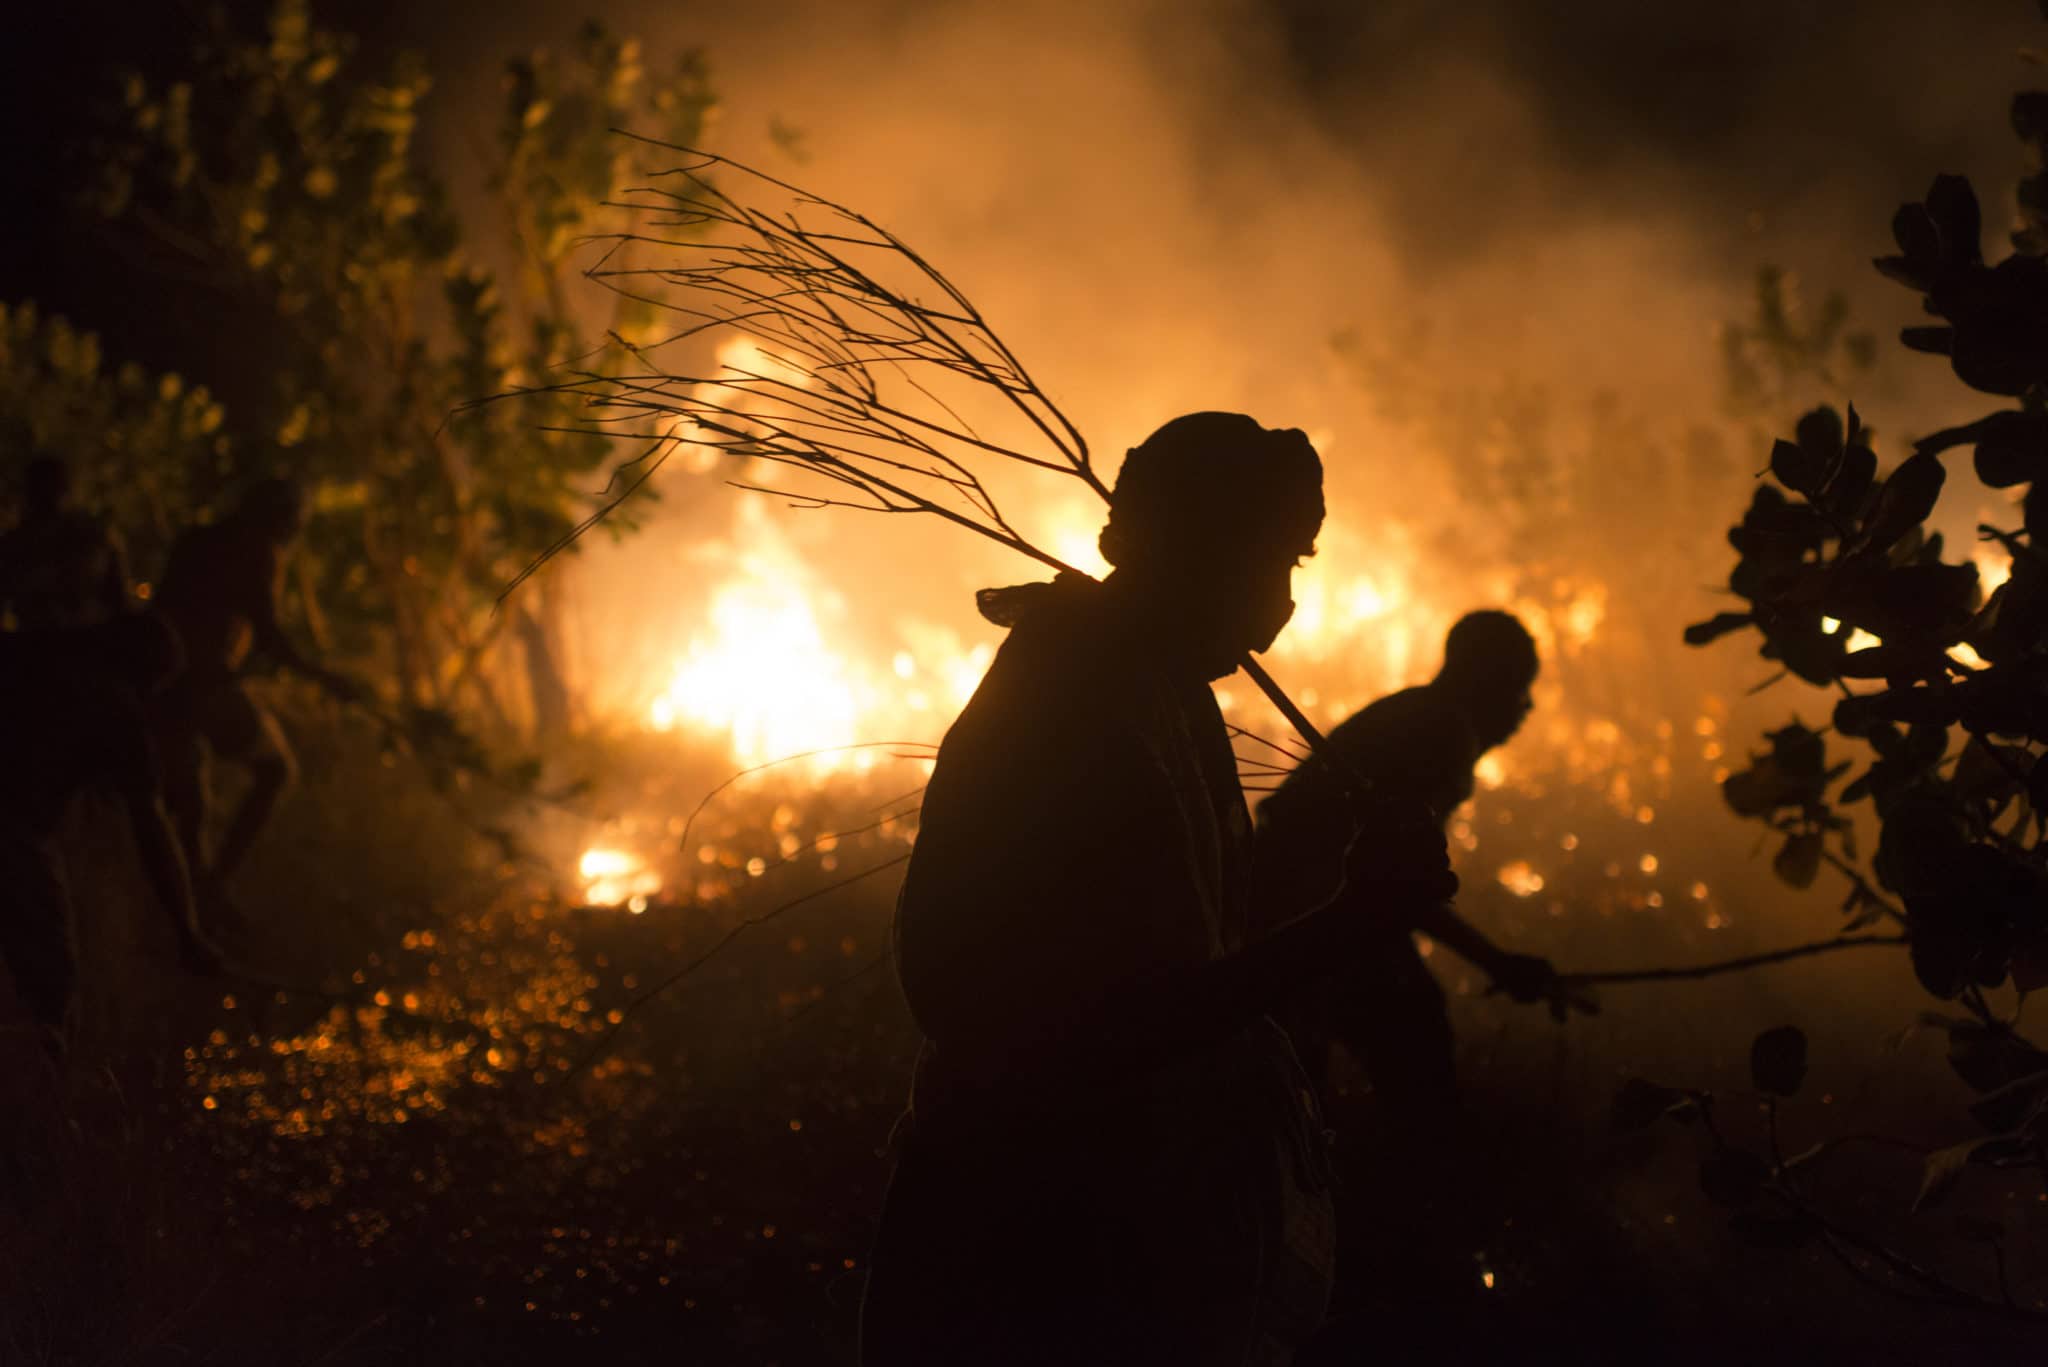 Silhouette of people against a wild fire